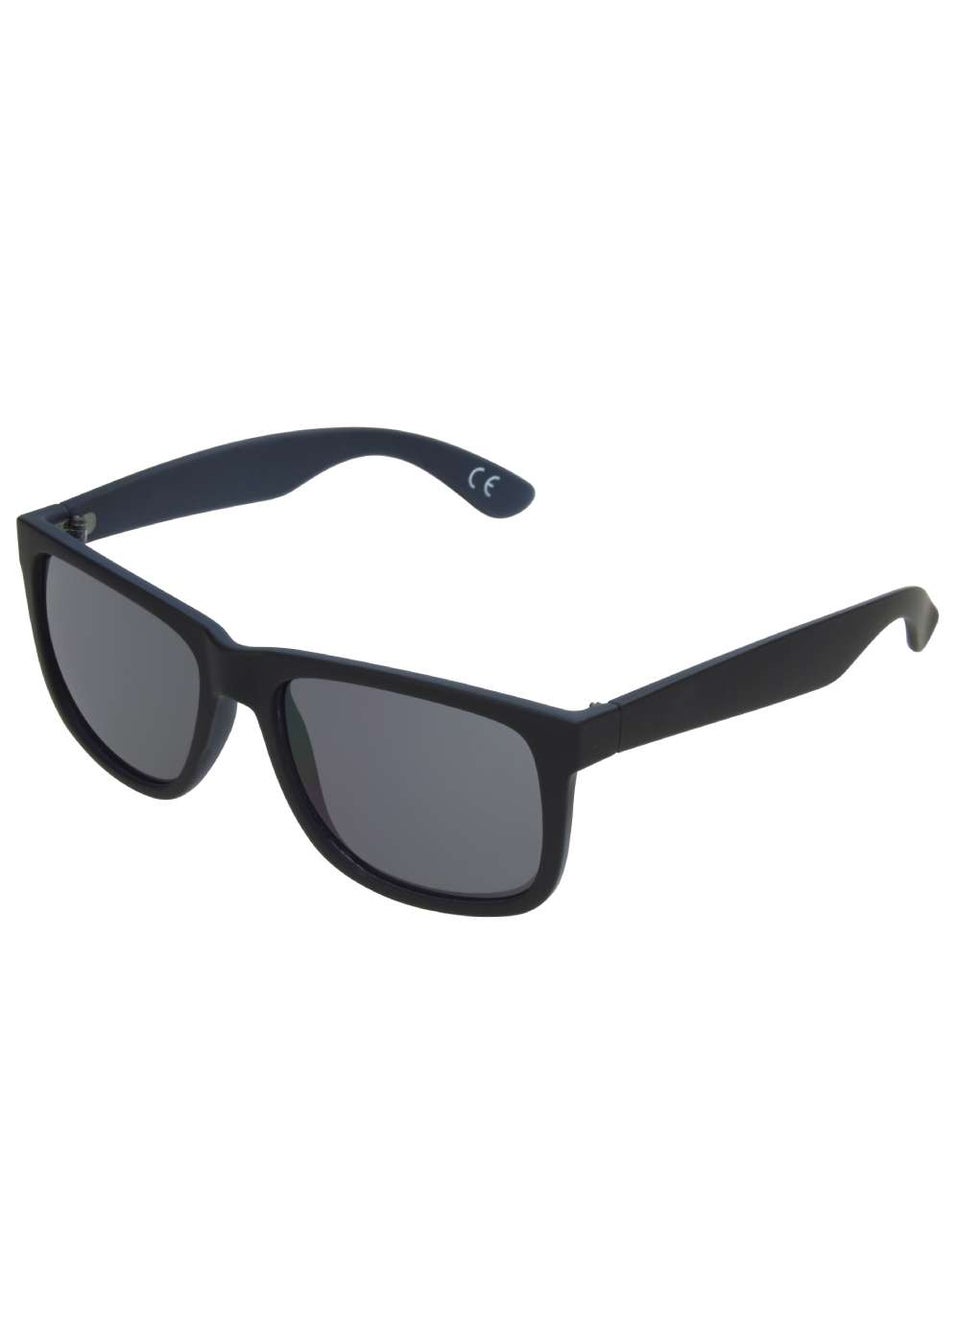 Foster Grant Smoked Lens Sunglasses